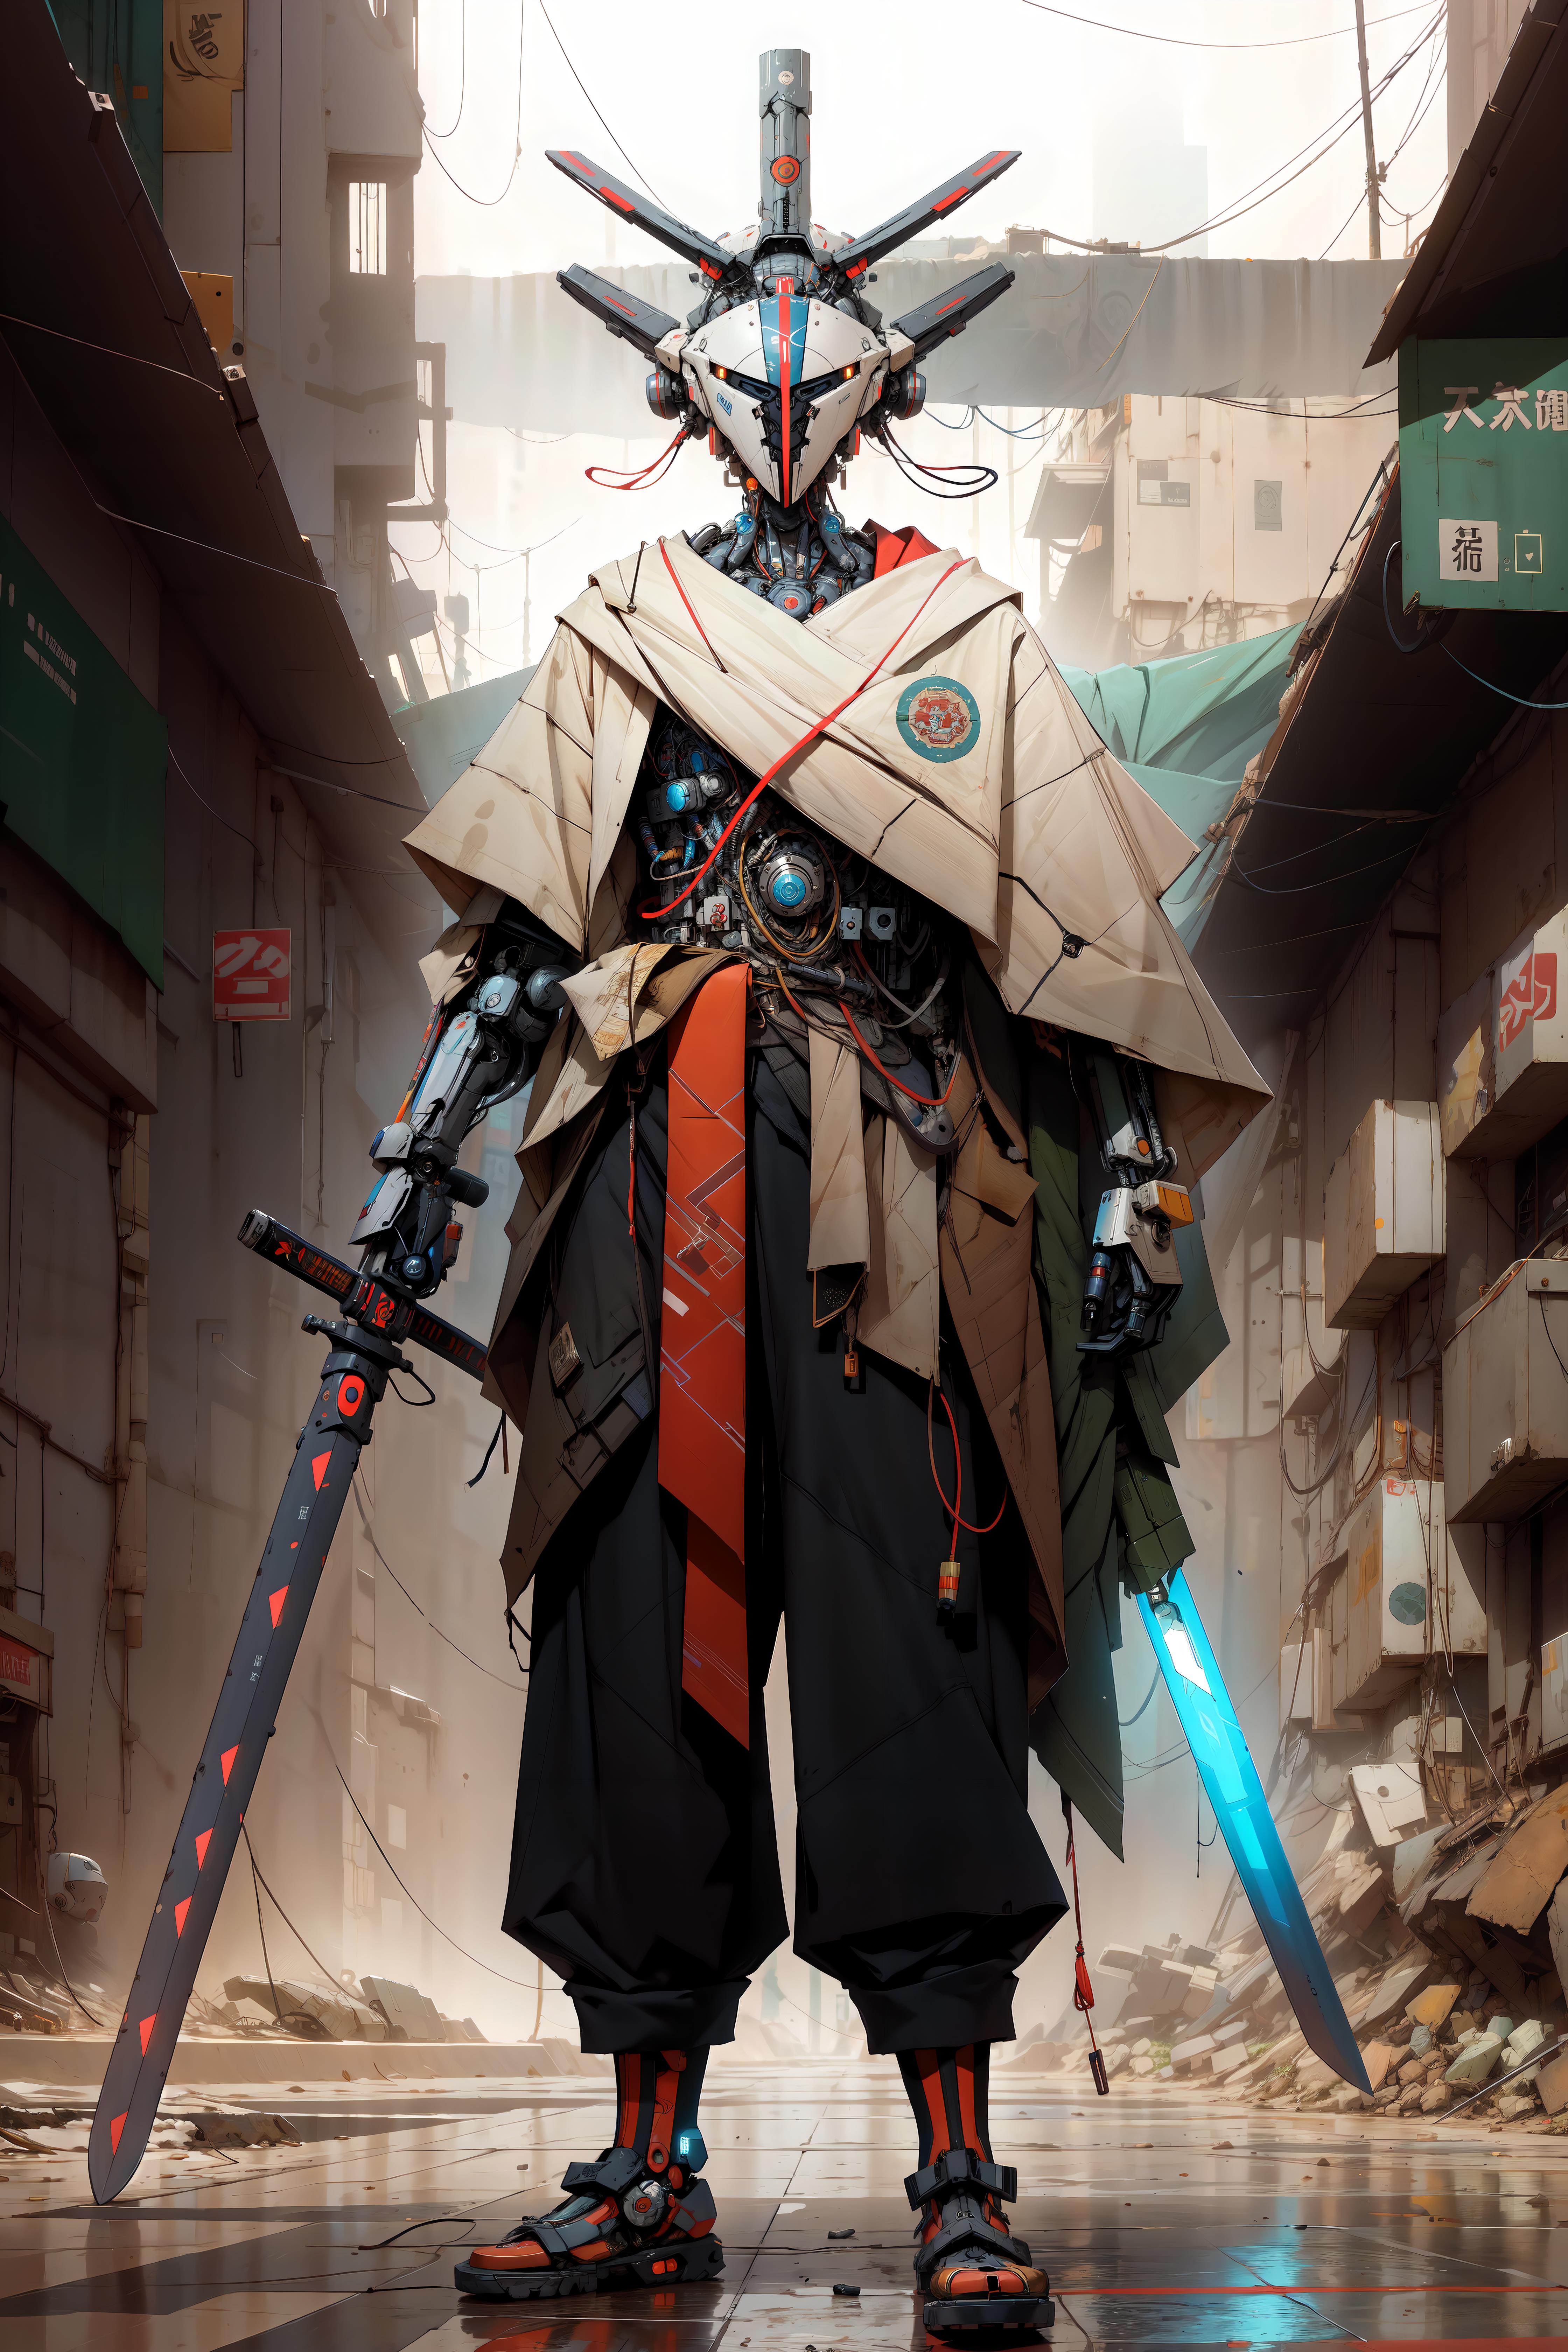 A robot with a sword and scissors on its back, standing in a city with buildings.